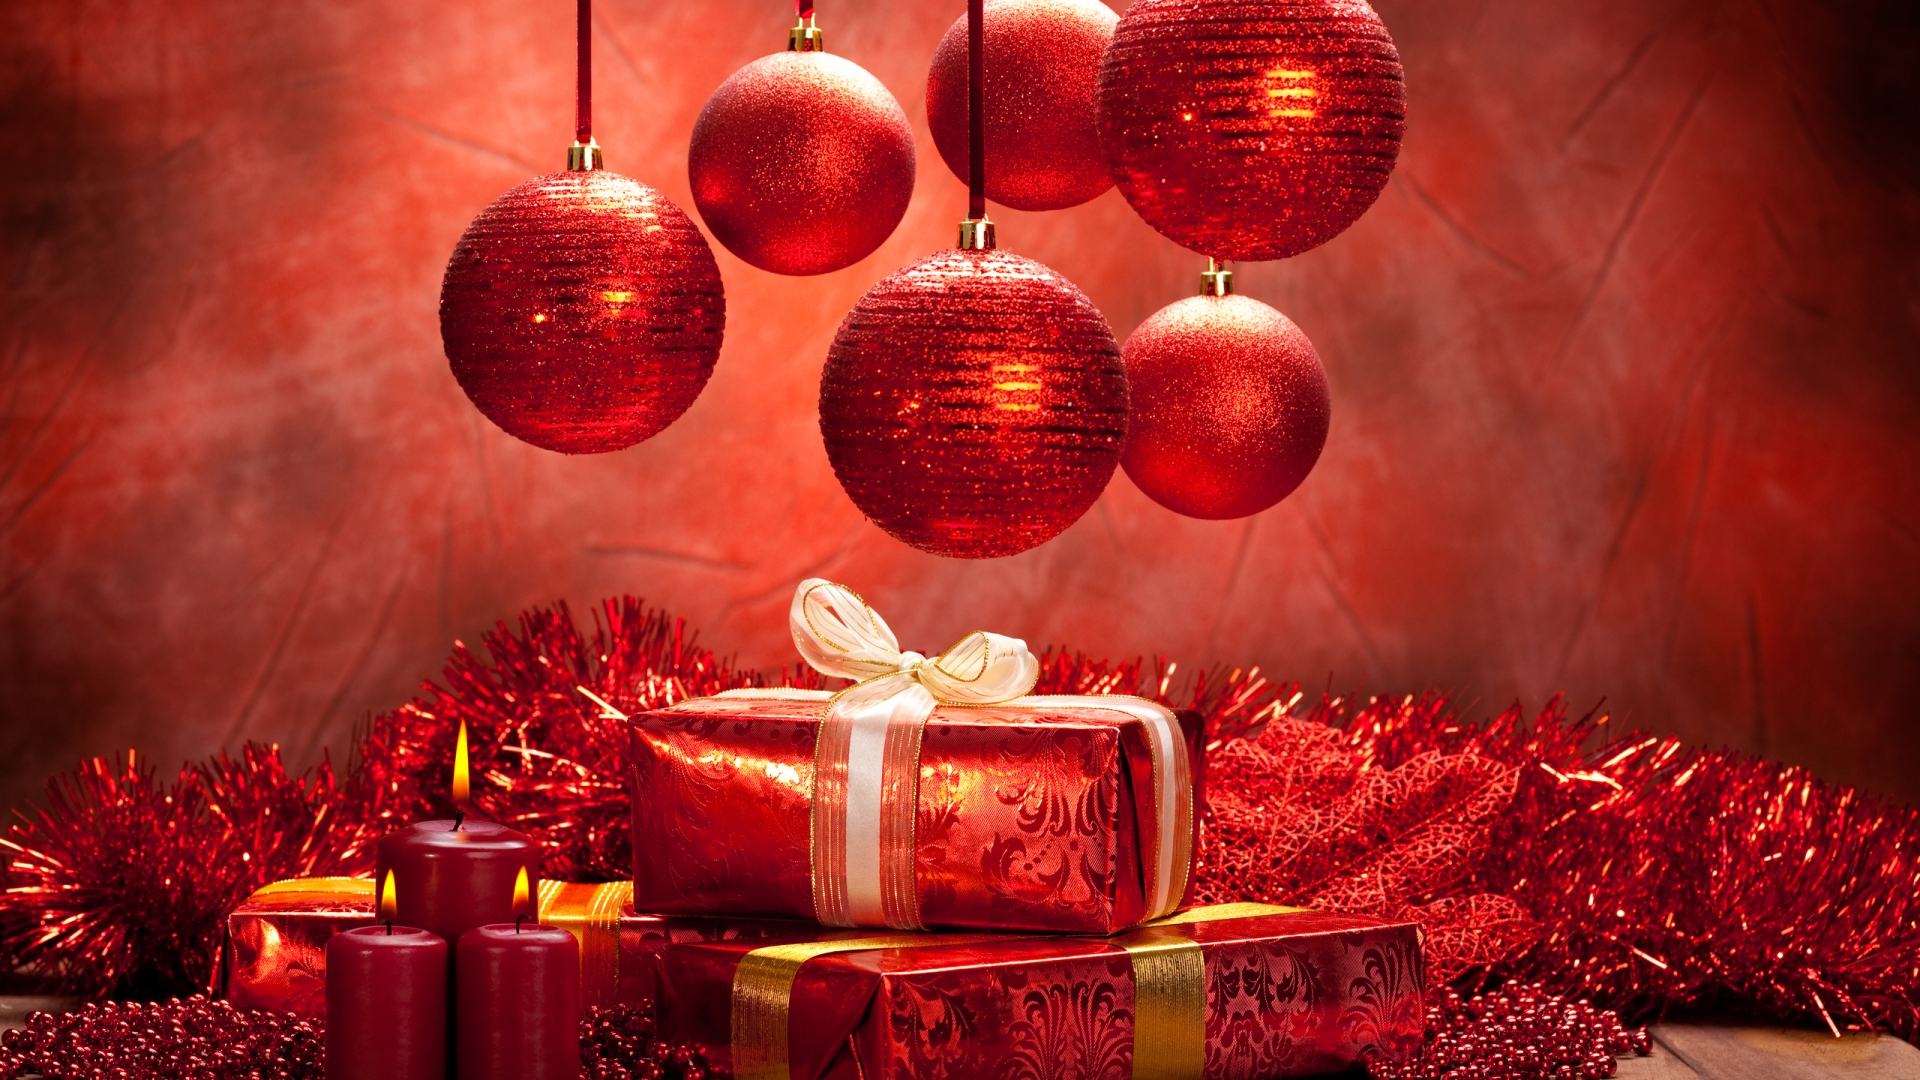 Christmas Balls and Gifts for 1920 x 1080 HDTV 1080p resolution